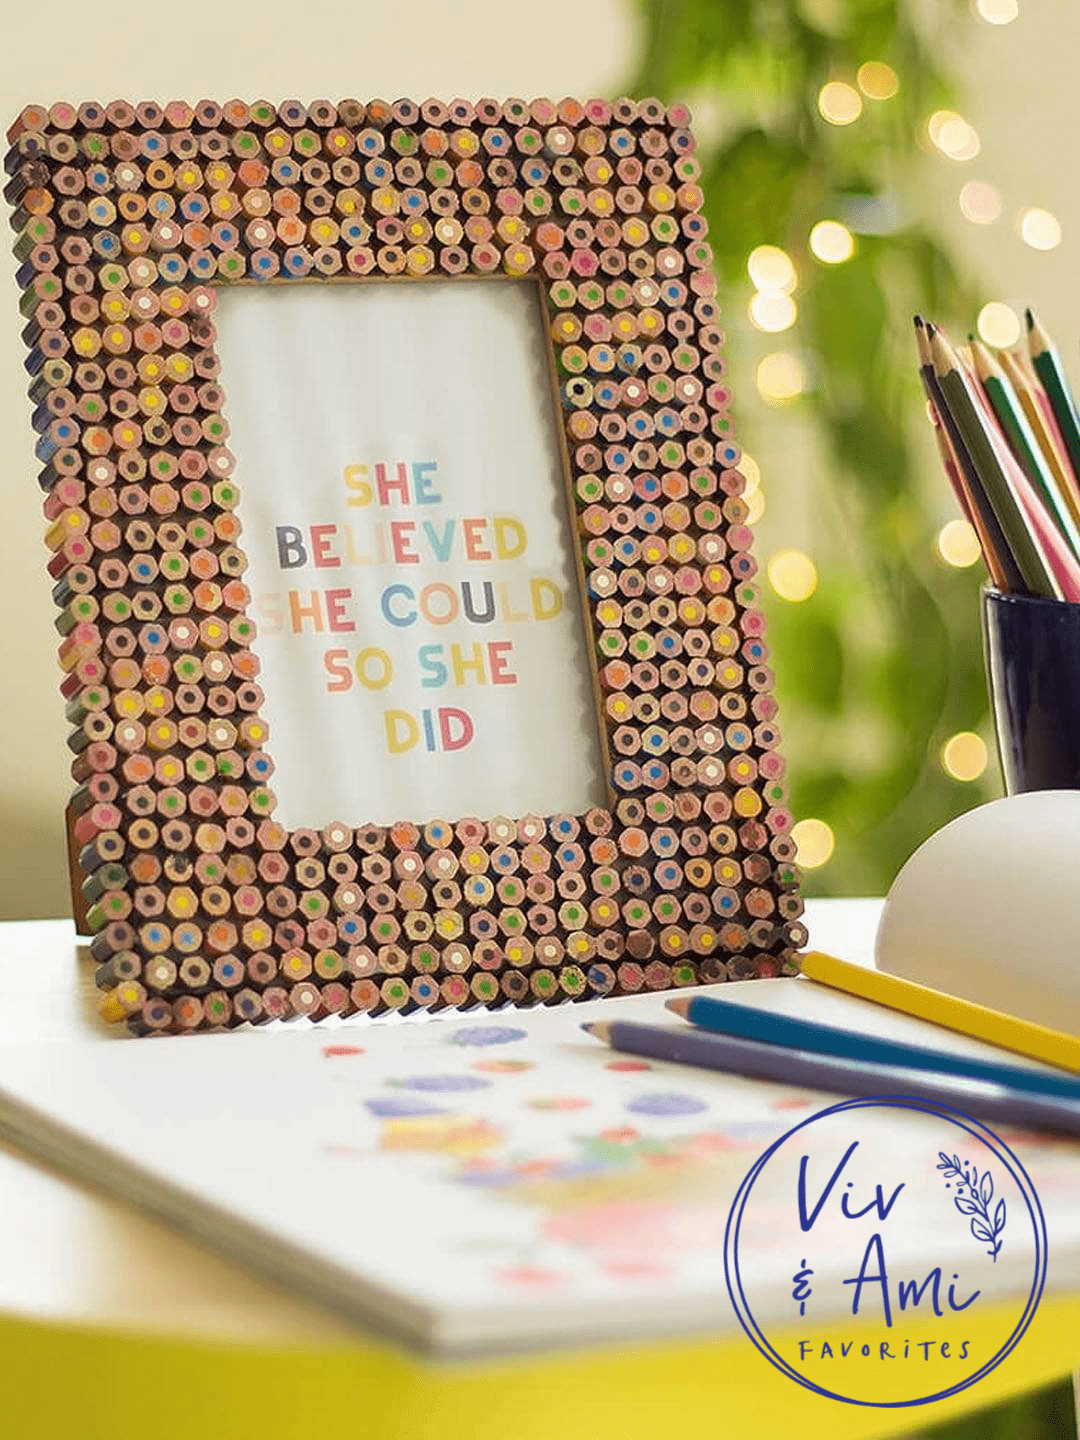 Color Pencils Photo Frame - The Wishing Chair